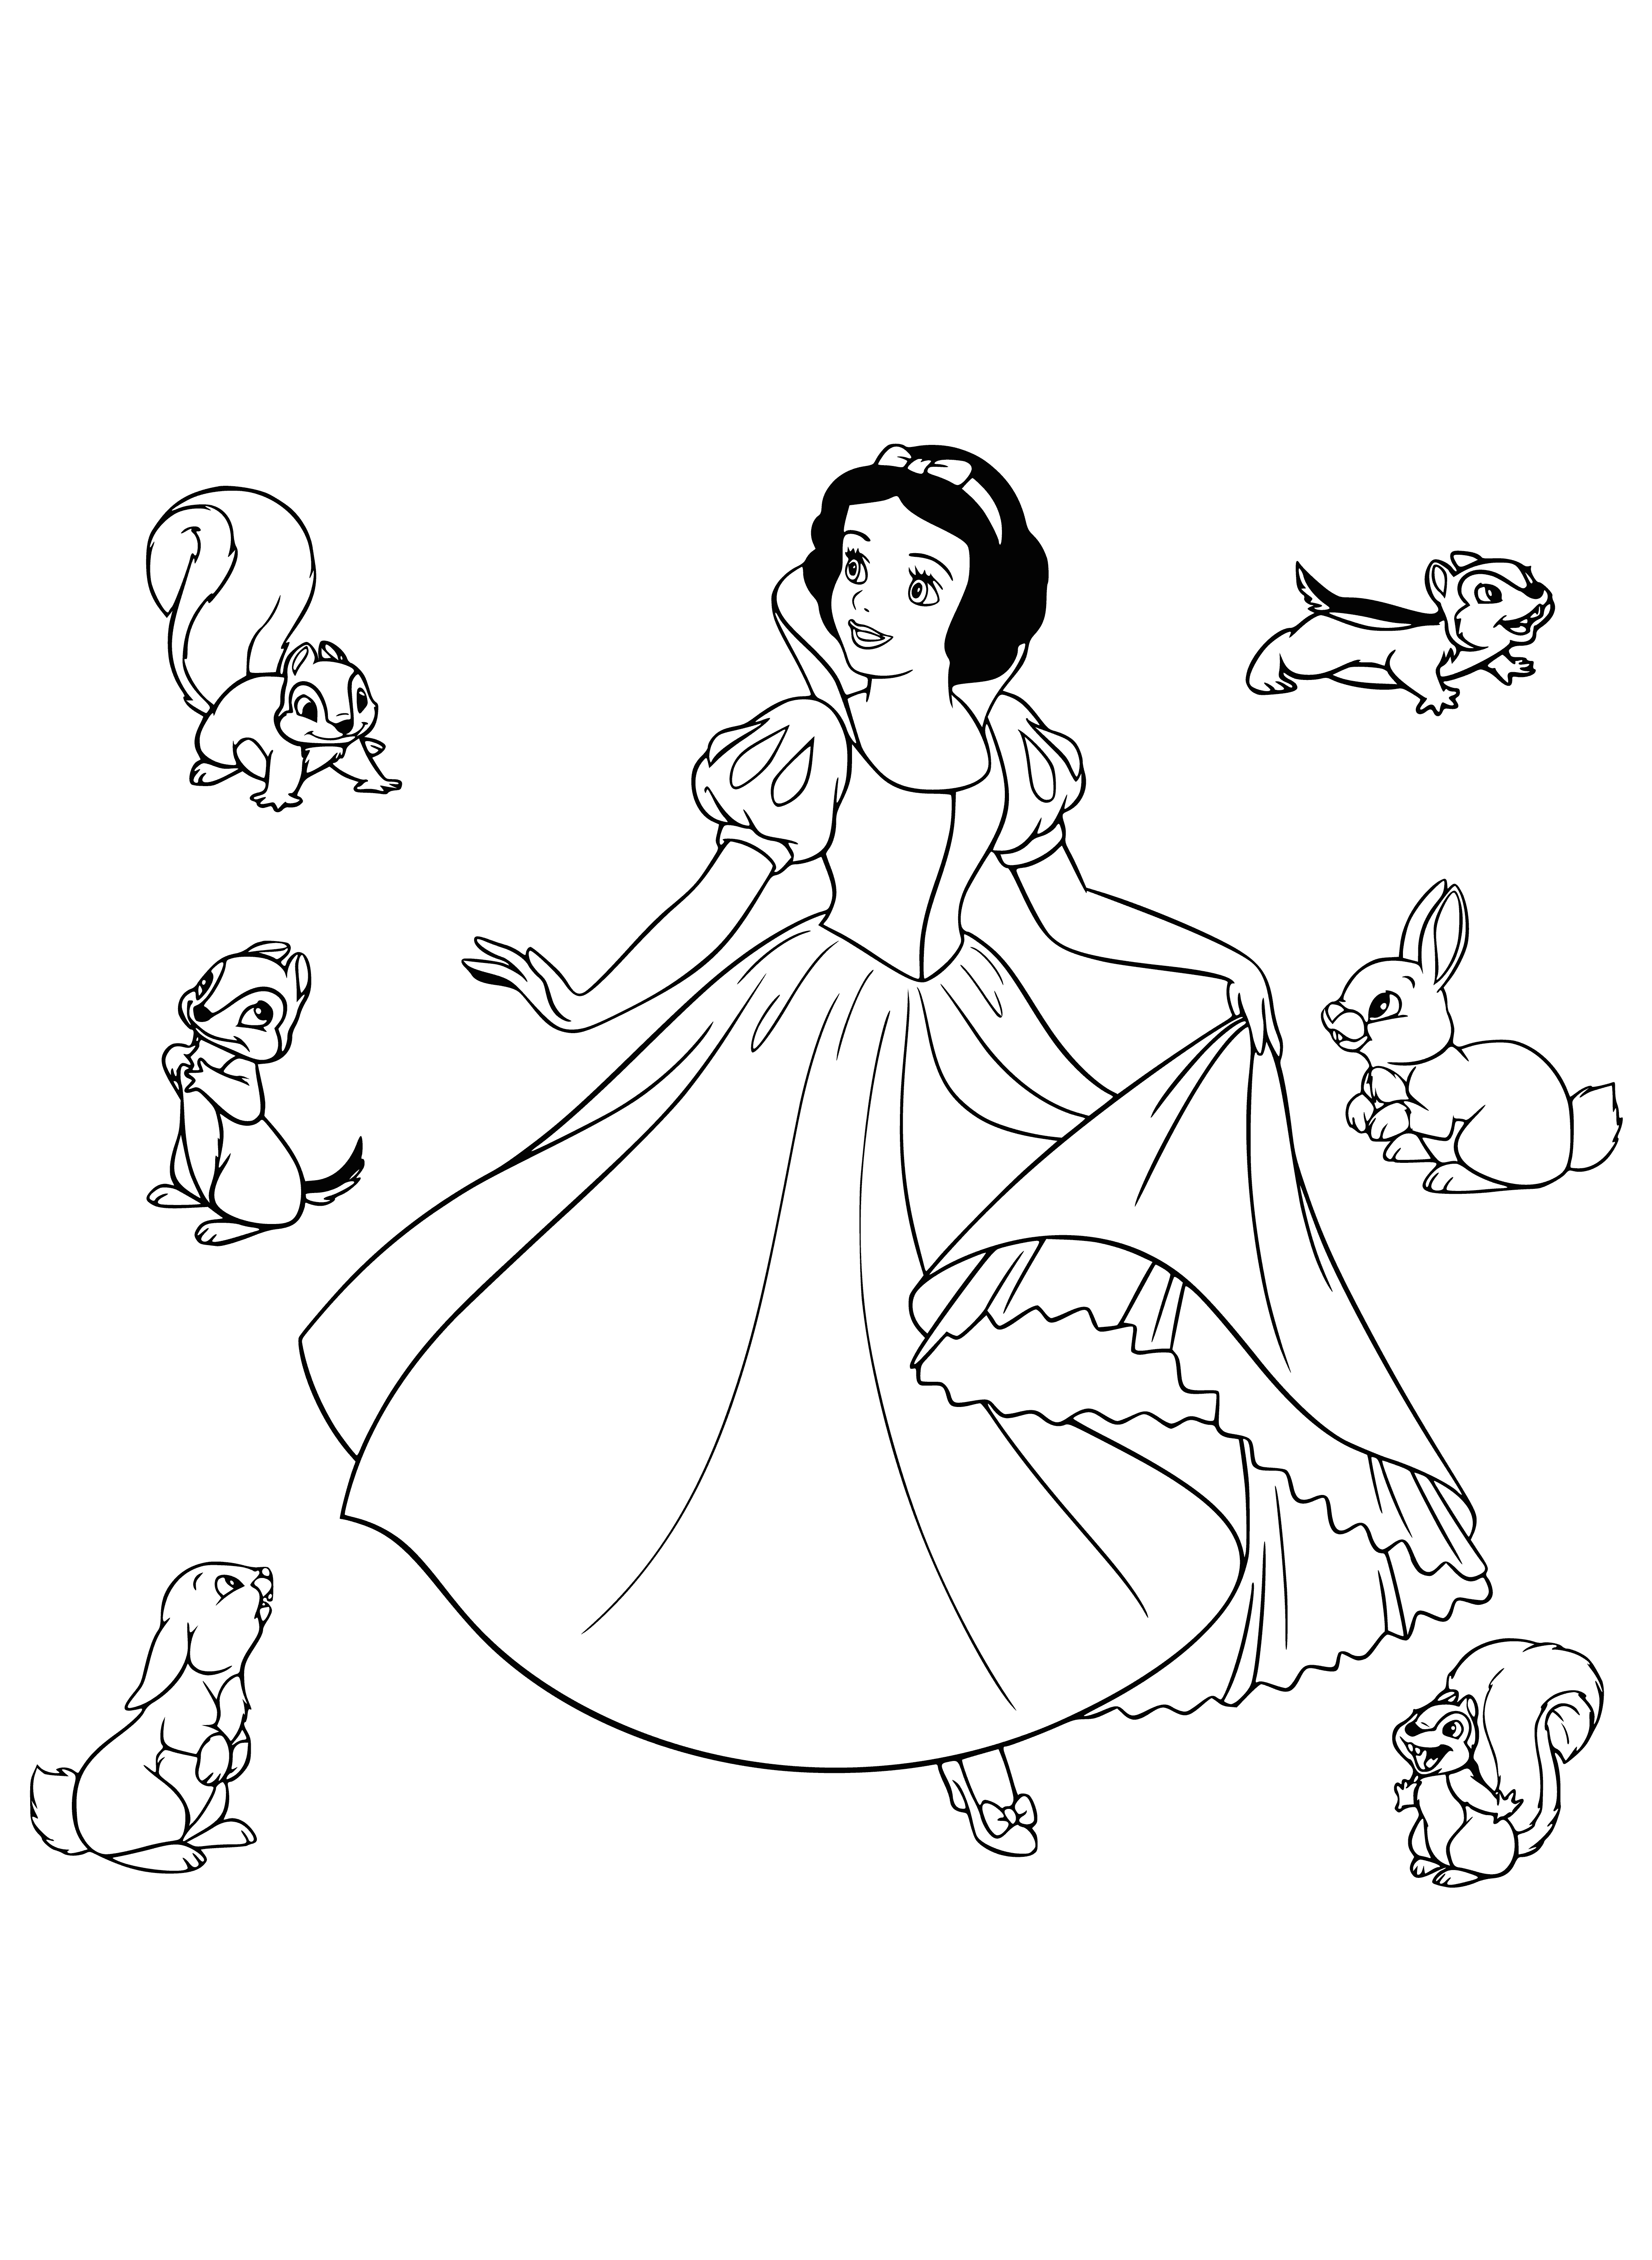 Snow White and the Forest Animals coloring page